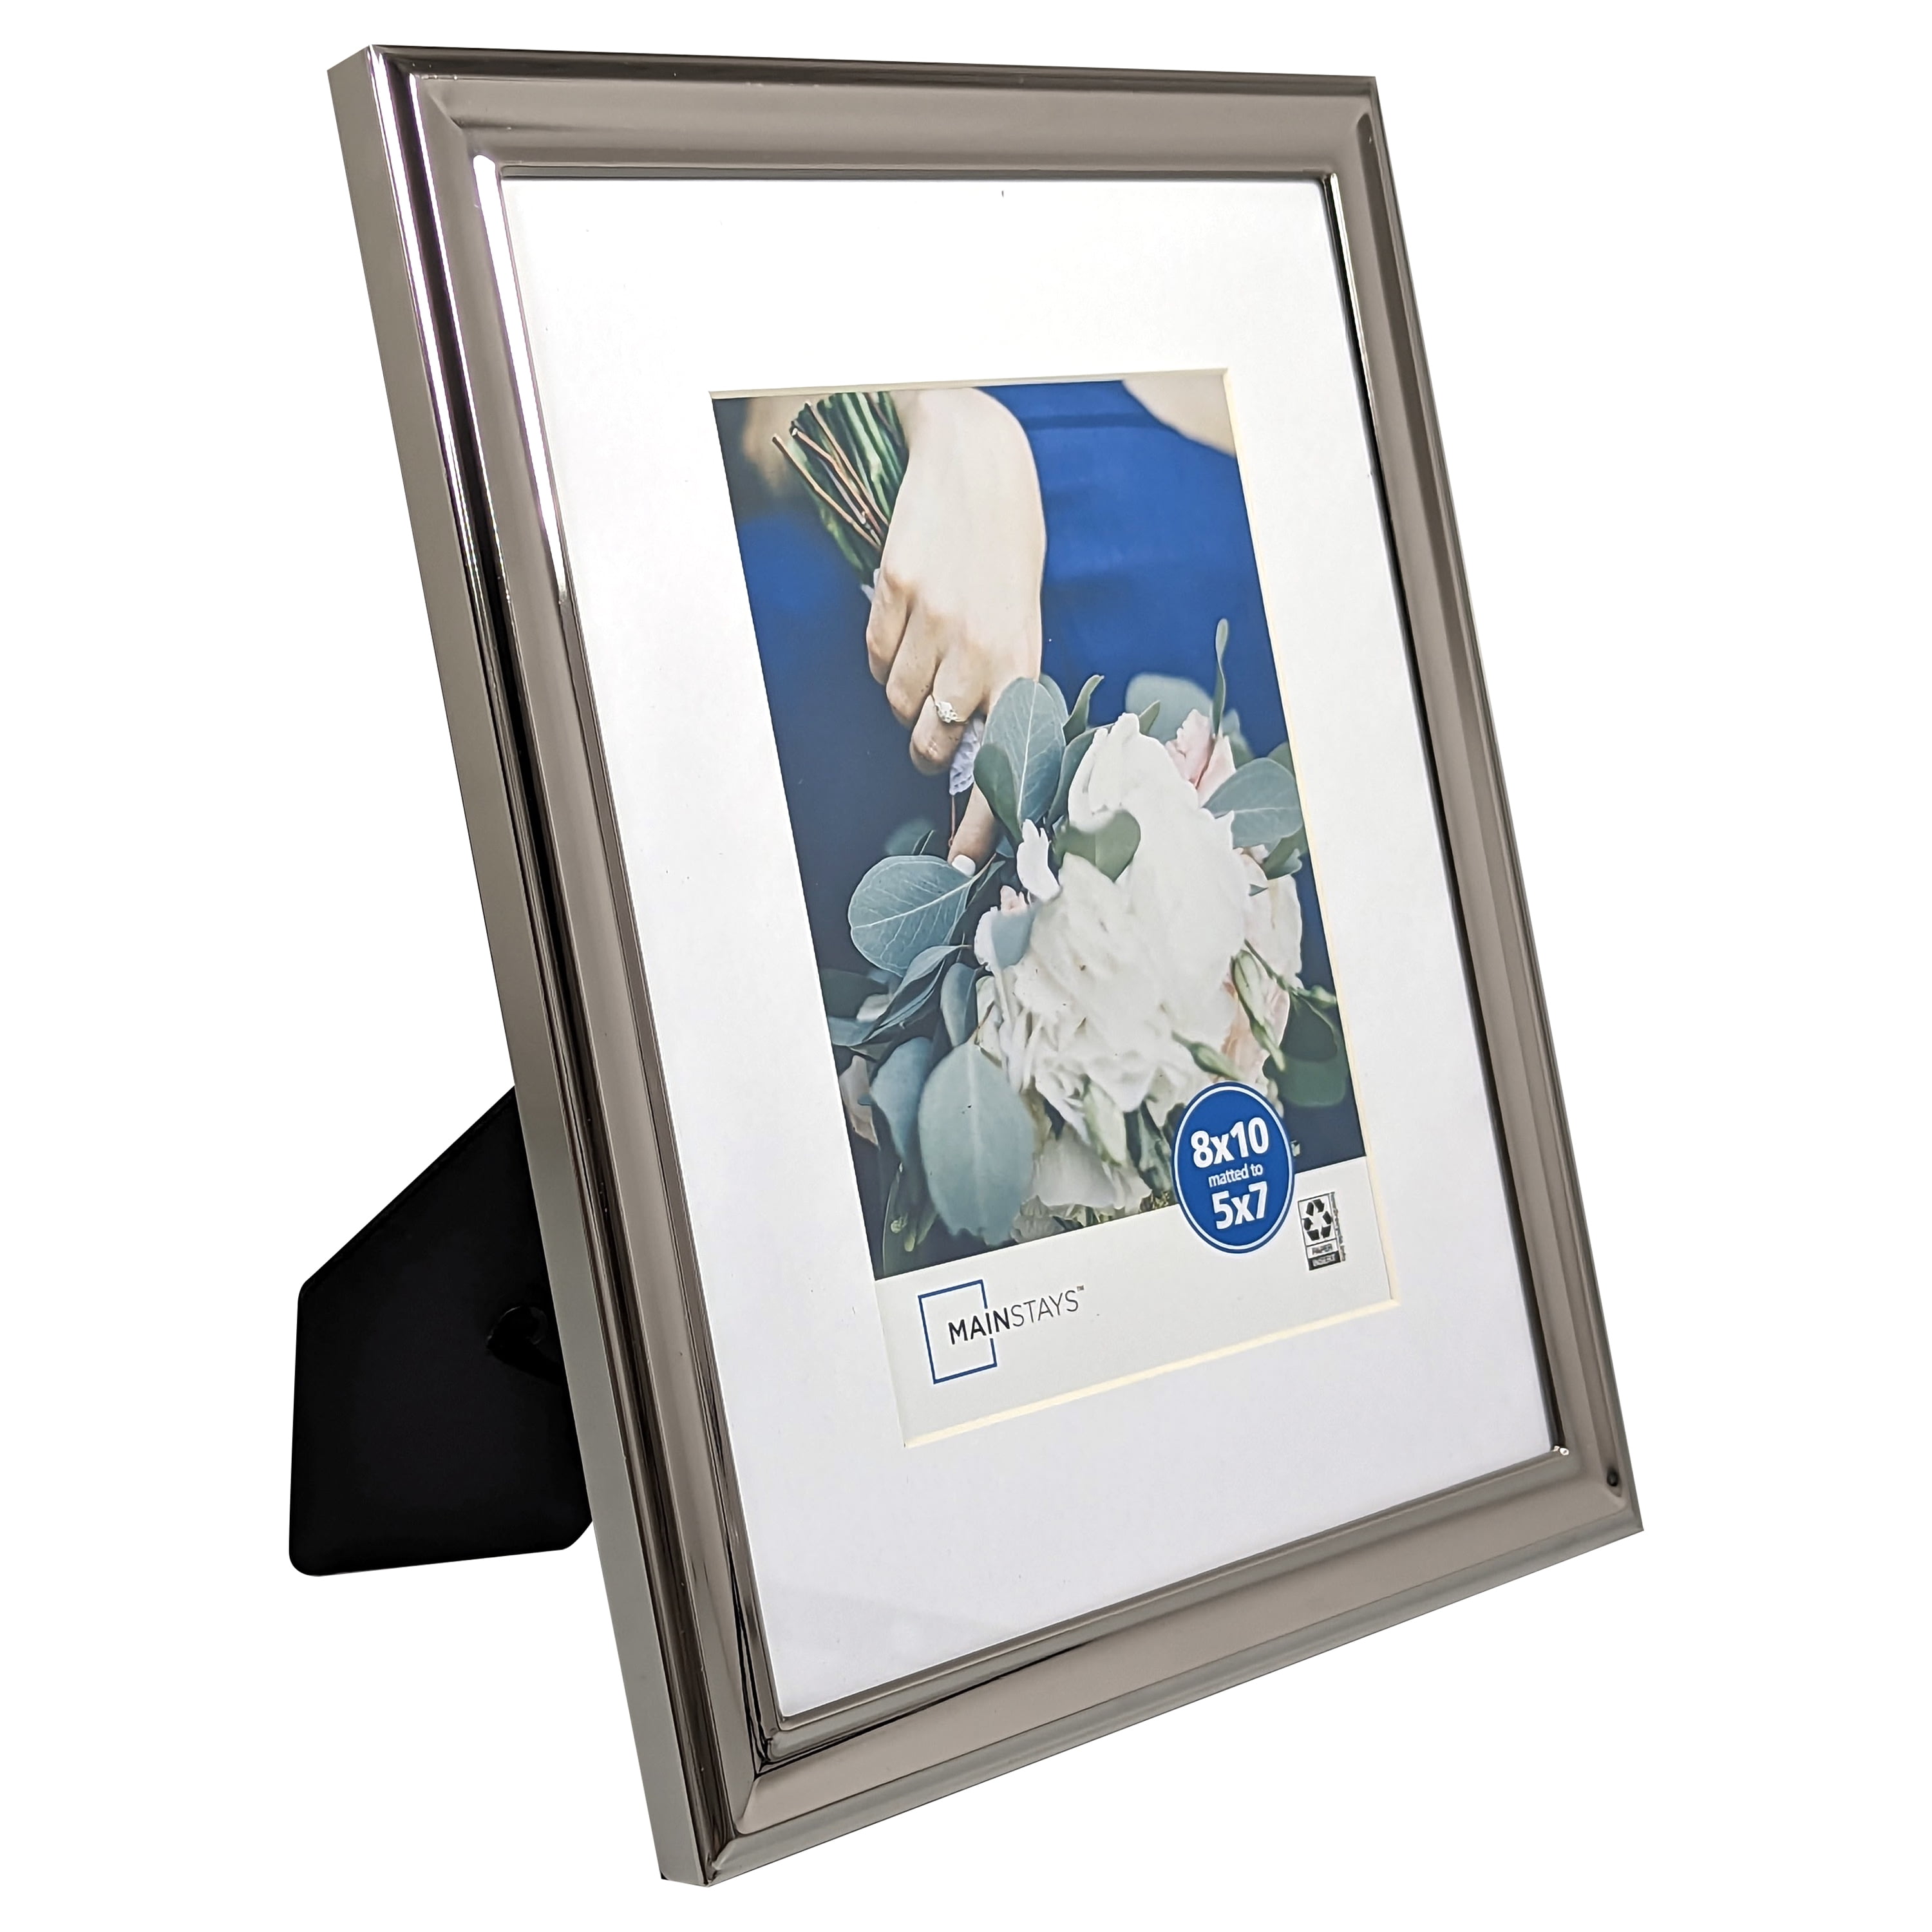 TUSCANY FLORENTINE-SILVER metallic frame matted 8x10 5x7 by Nielsen - 5x7 